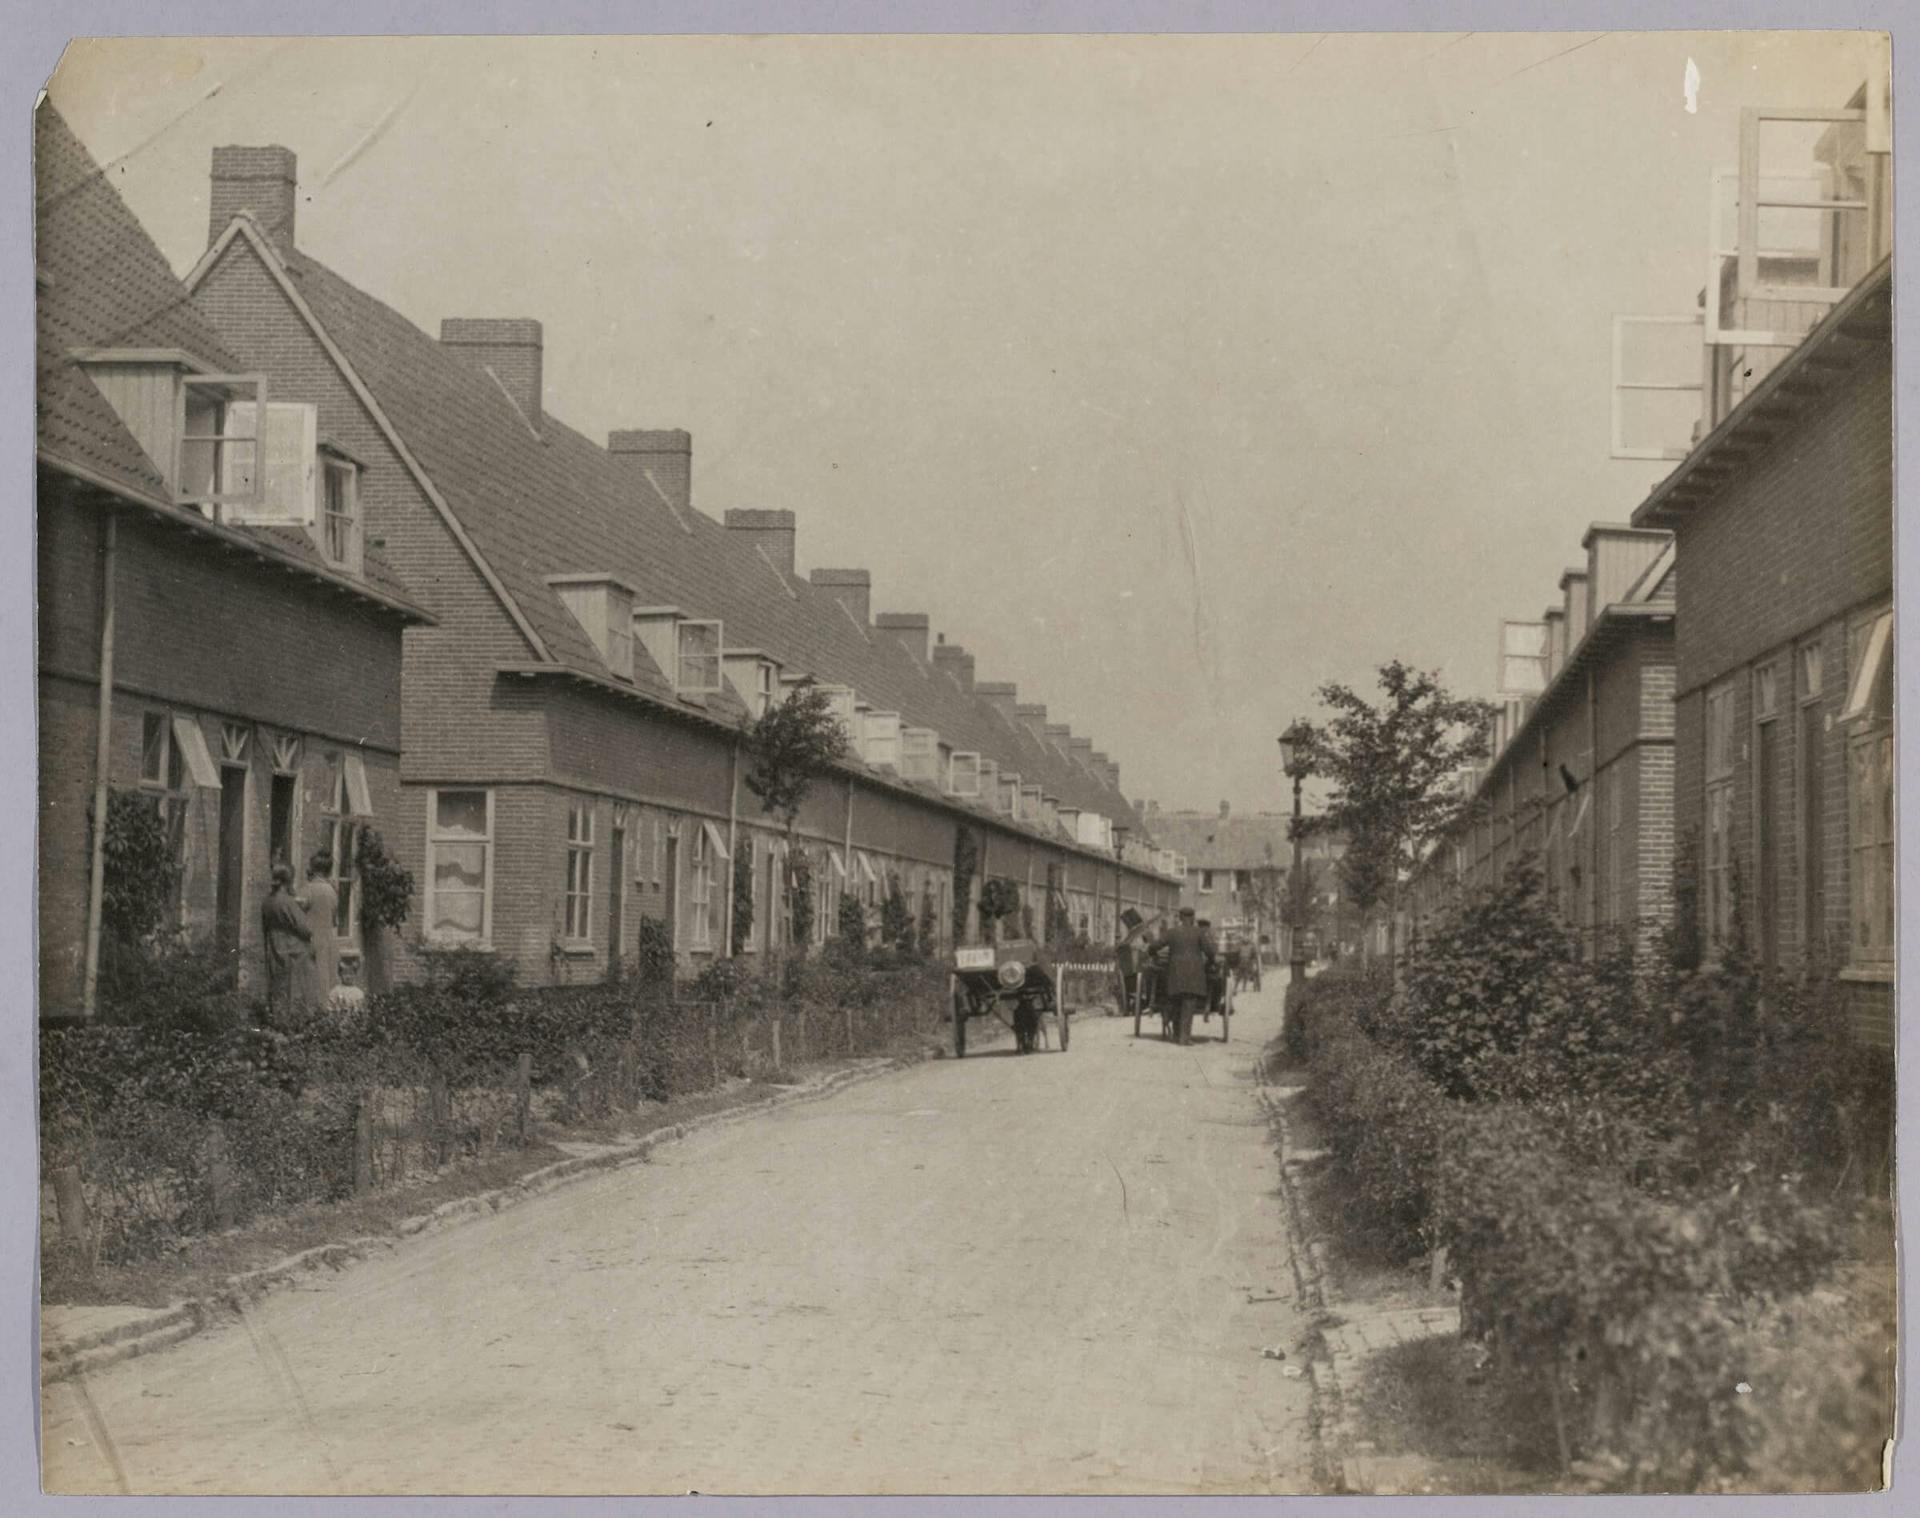 Residential street with front gardens and young trees in the garden suburb of Vreewijk, after a design by Granpré Molière, Verhagen and Kok, c. 1925. Photographer unknown. Collection: Het Nieuwe Instituut, photo collection of the Tentoonstellin… 